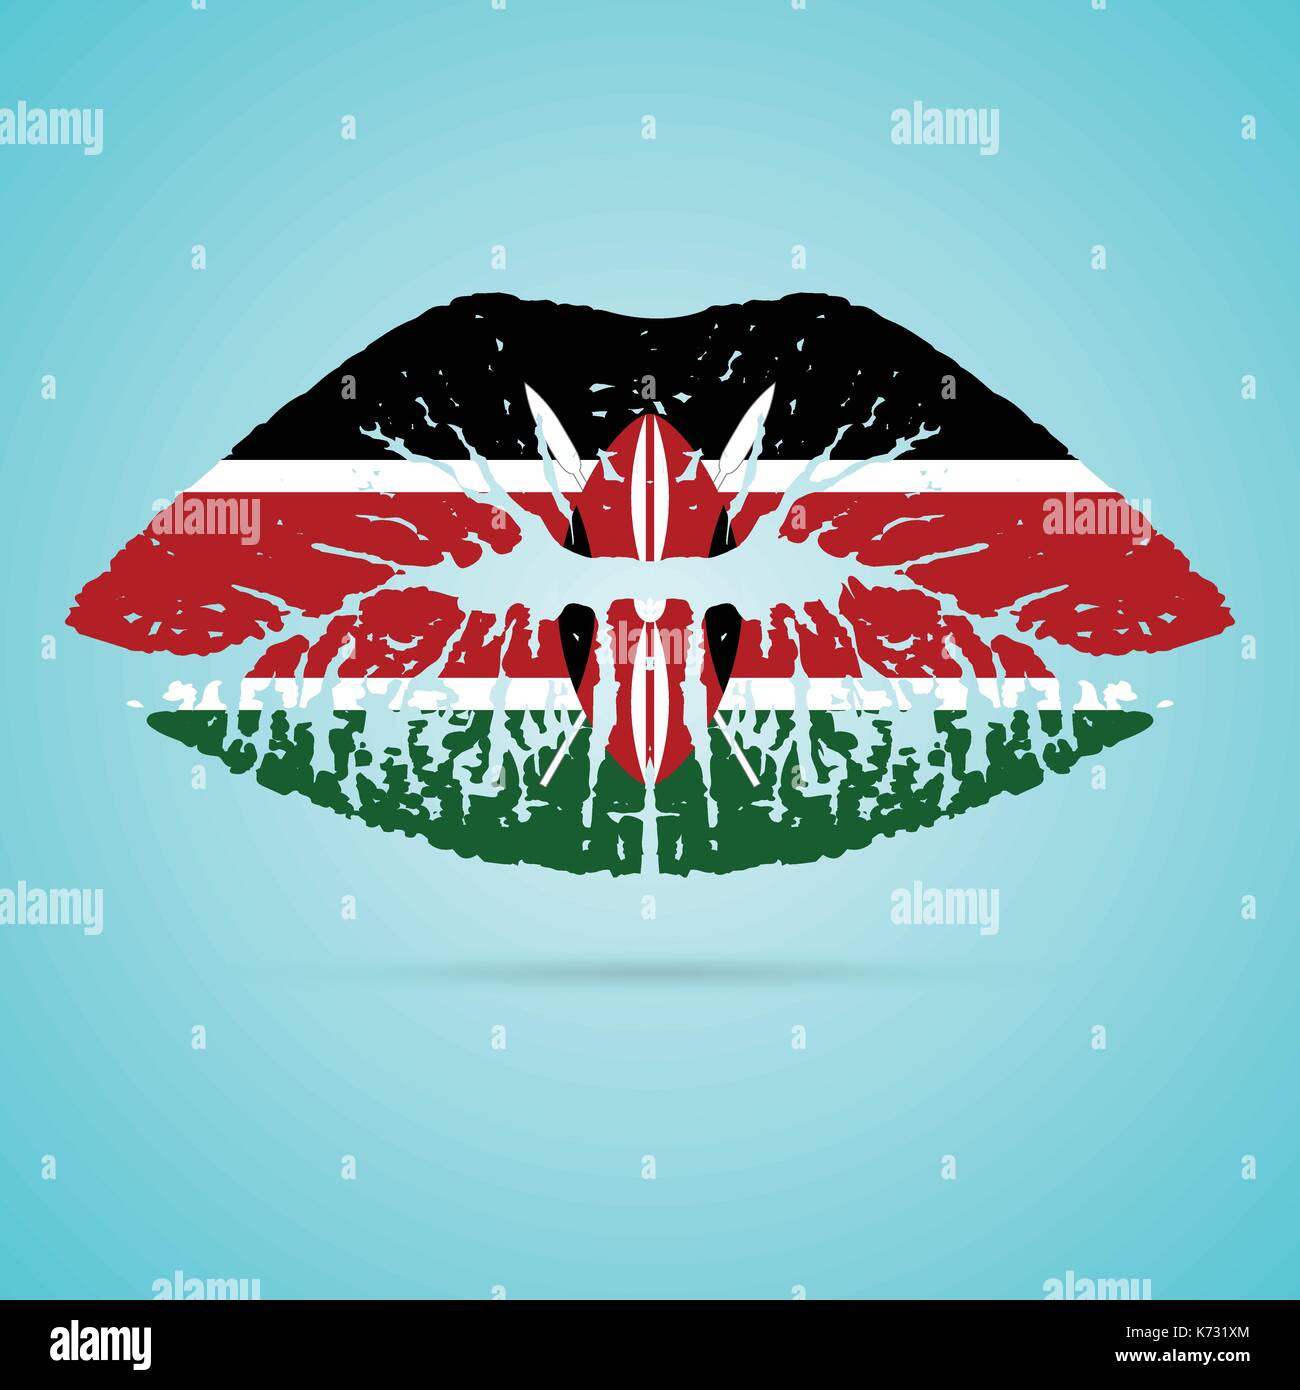 Kenya Flag Lipstick On The Lips Isolated On A White Background. Vector Illustration. Stock Vector